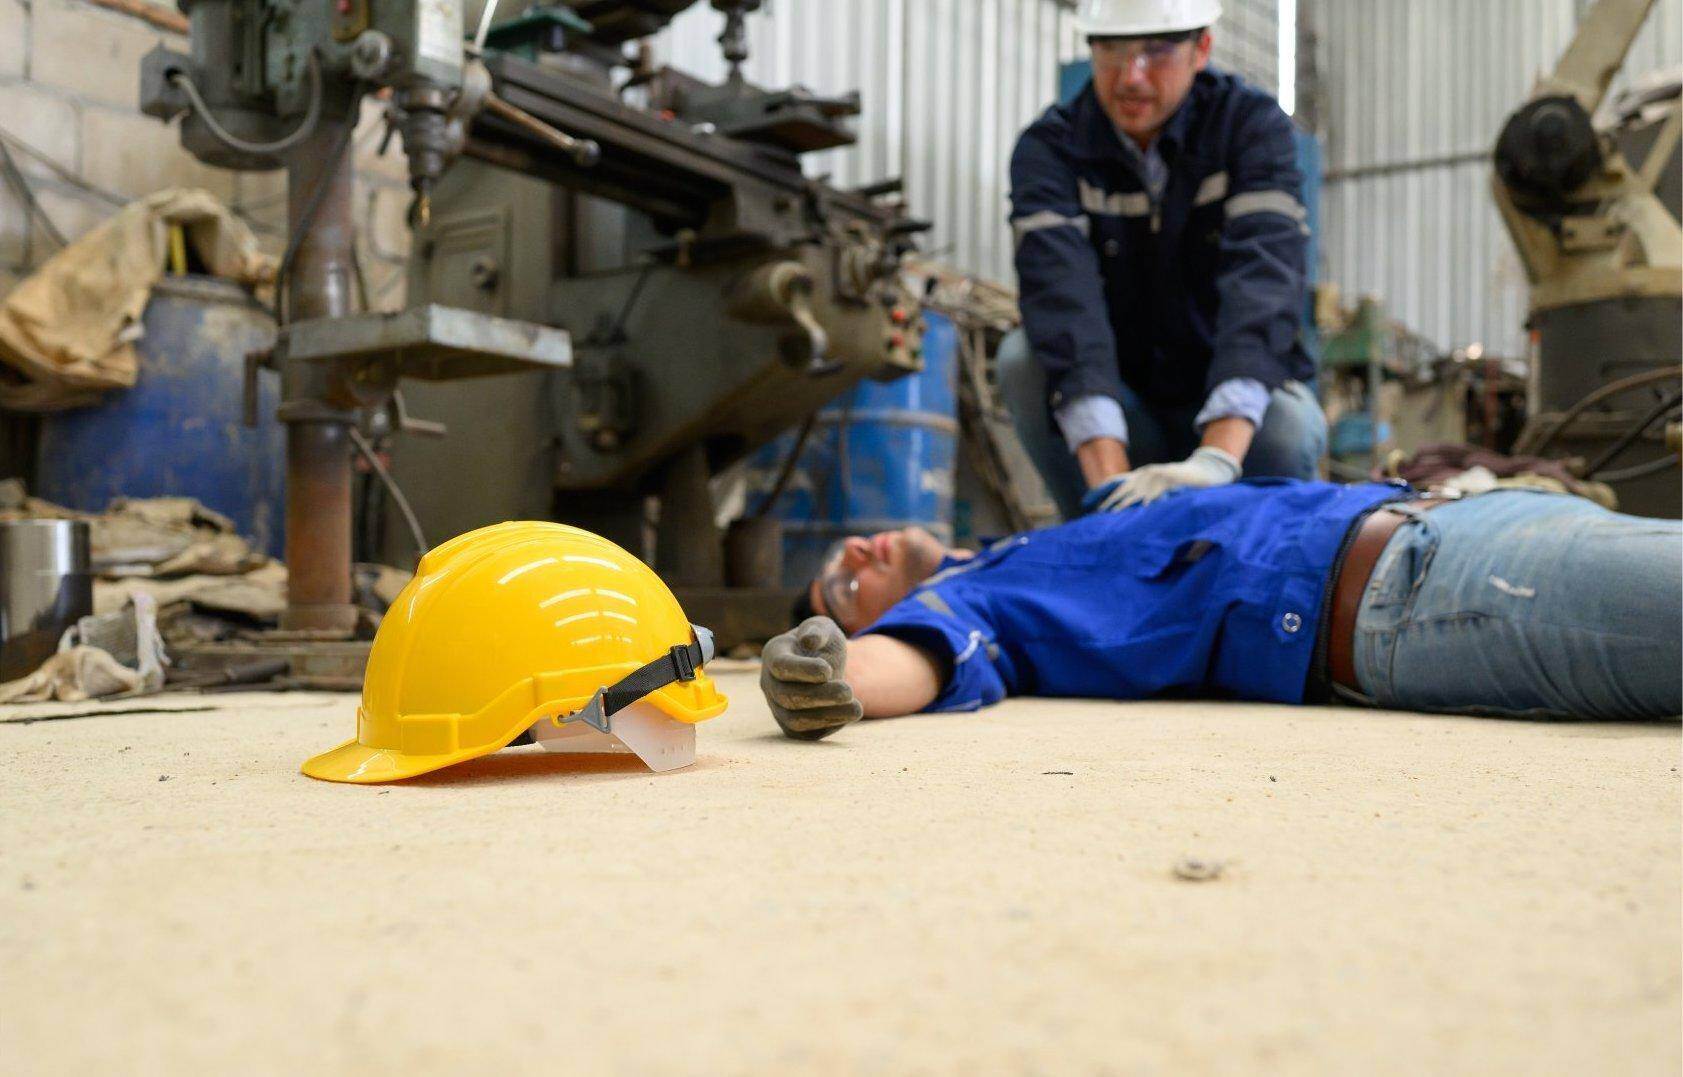 An unconscious man who has been injured on the job who will file for workers compensation in Kennesaw, Georgia